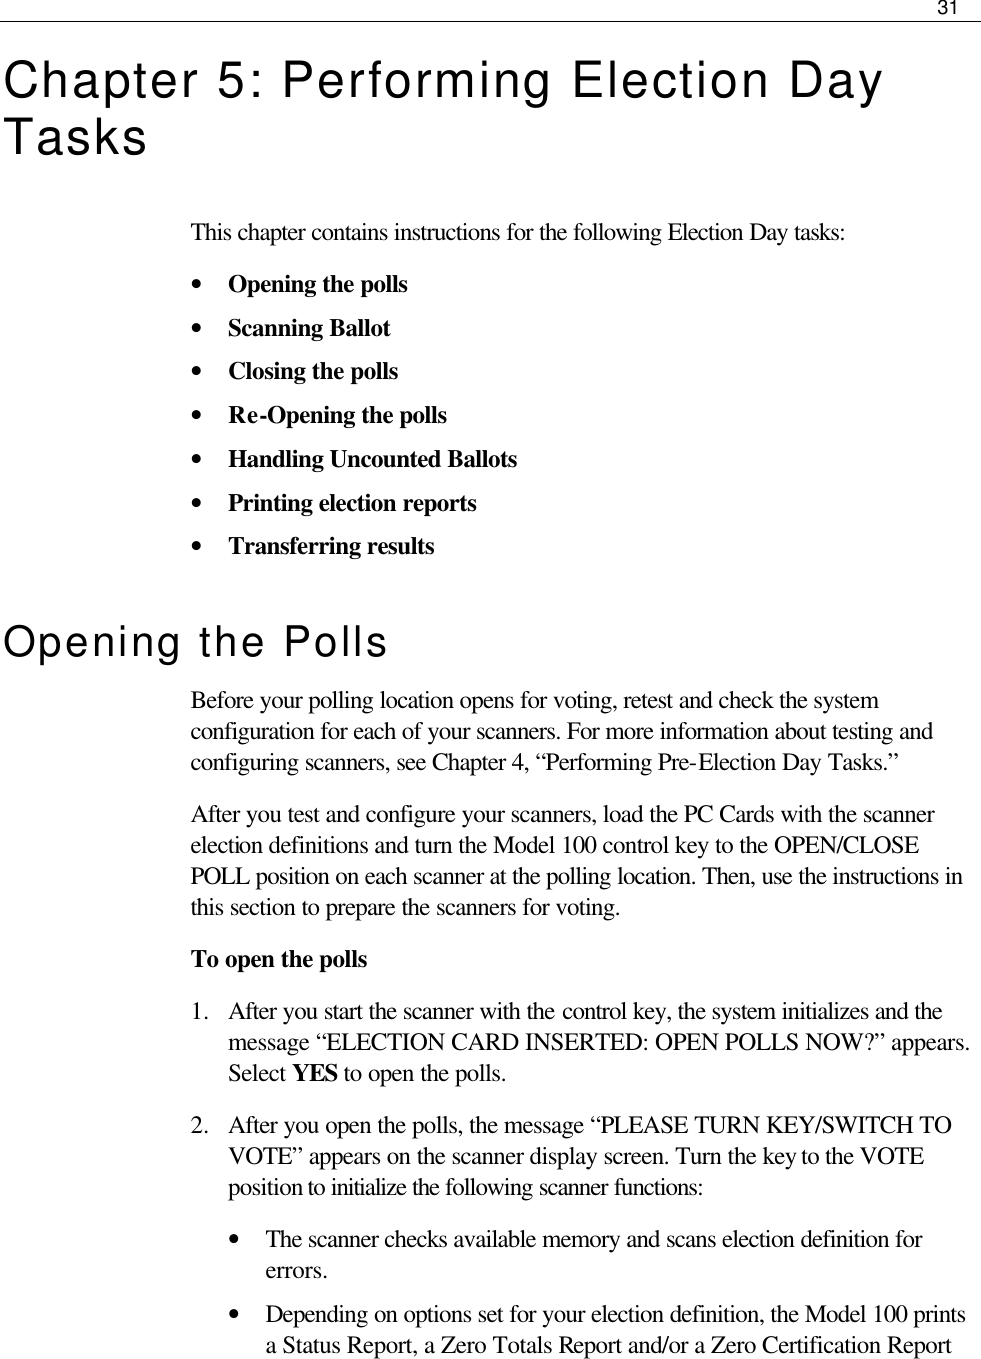     31  Chapter 5: Performing Election Day Tasks This chapter contains instructions for the following Election Day tasks: • Opening the polls • Scanning Ballot • Closing the polls • Re-Opening the polls • Handling Uncounted Ballots • Printing election reports • Transferring results Opening the Polls Before your polling location opens for voting, retest and check the system configuration for each of your scanners. For more information about testing and configuring scanners, see Chapter 4, “Performing Pre-Election Day Tasks.” After you test and configure your scanners, load the PC Cards with the scanner election definitions and turn the Model 100 control key to the OPEN/CLOSE POLL position on each scanner at the polling location. Then, use the instructions in this section to prepare the scanners for voting. To open the polls 1.  After you start the scanner with the control key, the system initializes and the message “ELECTION CARD INSERTED: OPEN POLLS NOW?” appears. Select YES to open the polls. 2.  After you open the polls, the message “PLEASE TURN KEY/SWITCH TO VOTE” appears on the scanner display screen. Turn the key to the VOTE position to initialize the following scanner functions: • The scanner checks available memory and scans election definition for errors.  • Depending on options set for your election definition, the Model 100 prints a Status Report, a Zero Totals Report and/or a Zero Certification Report 